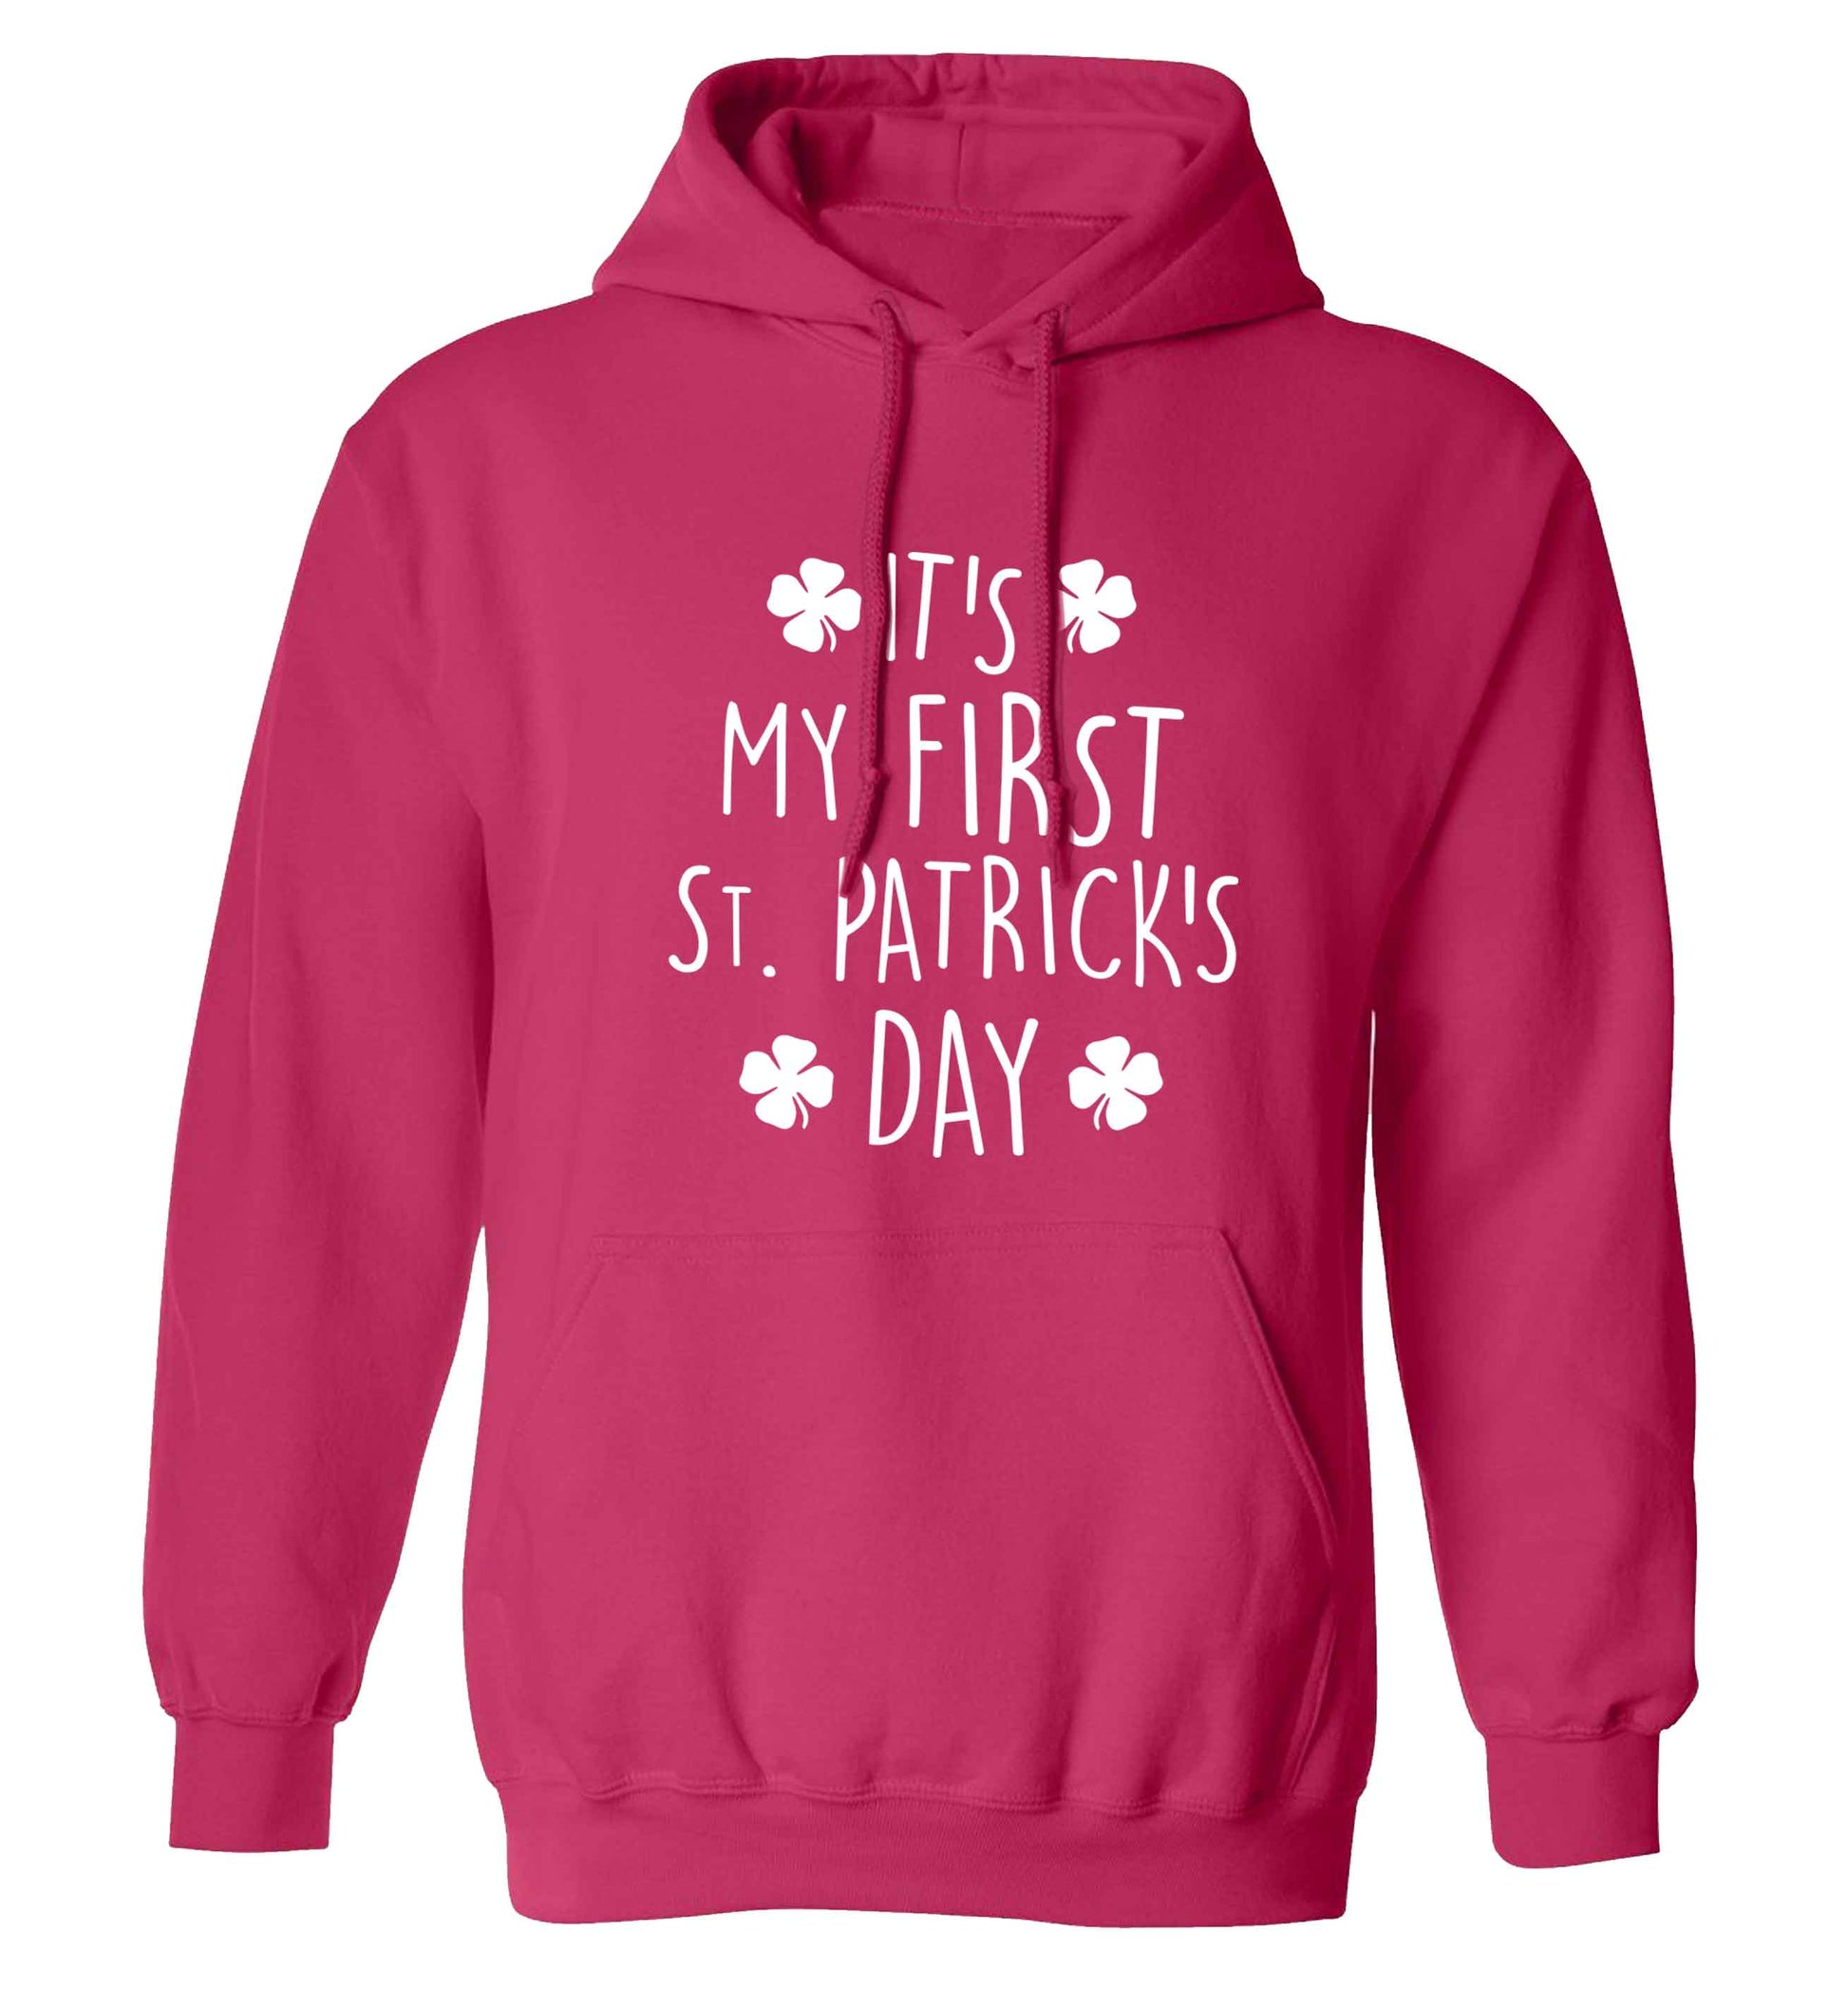 It's my first St.Patrick's day adults unisex pink hoodie 2XL